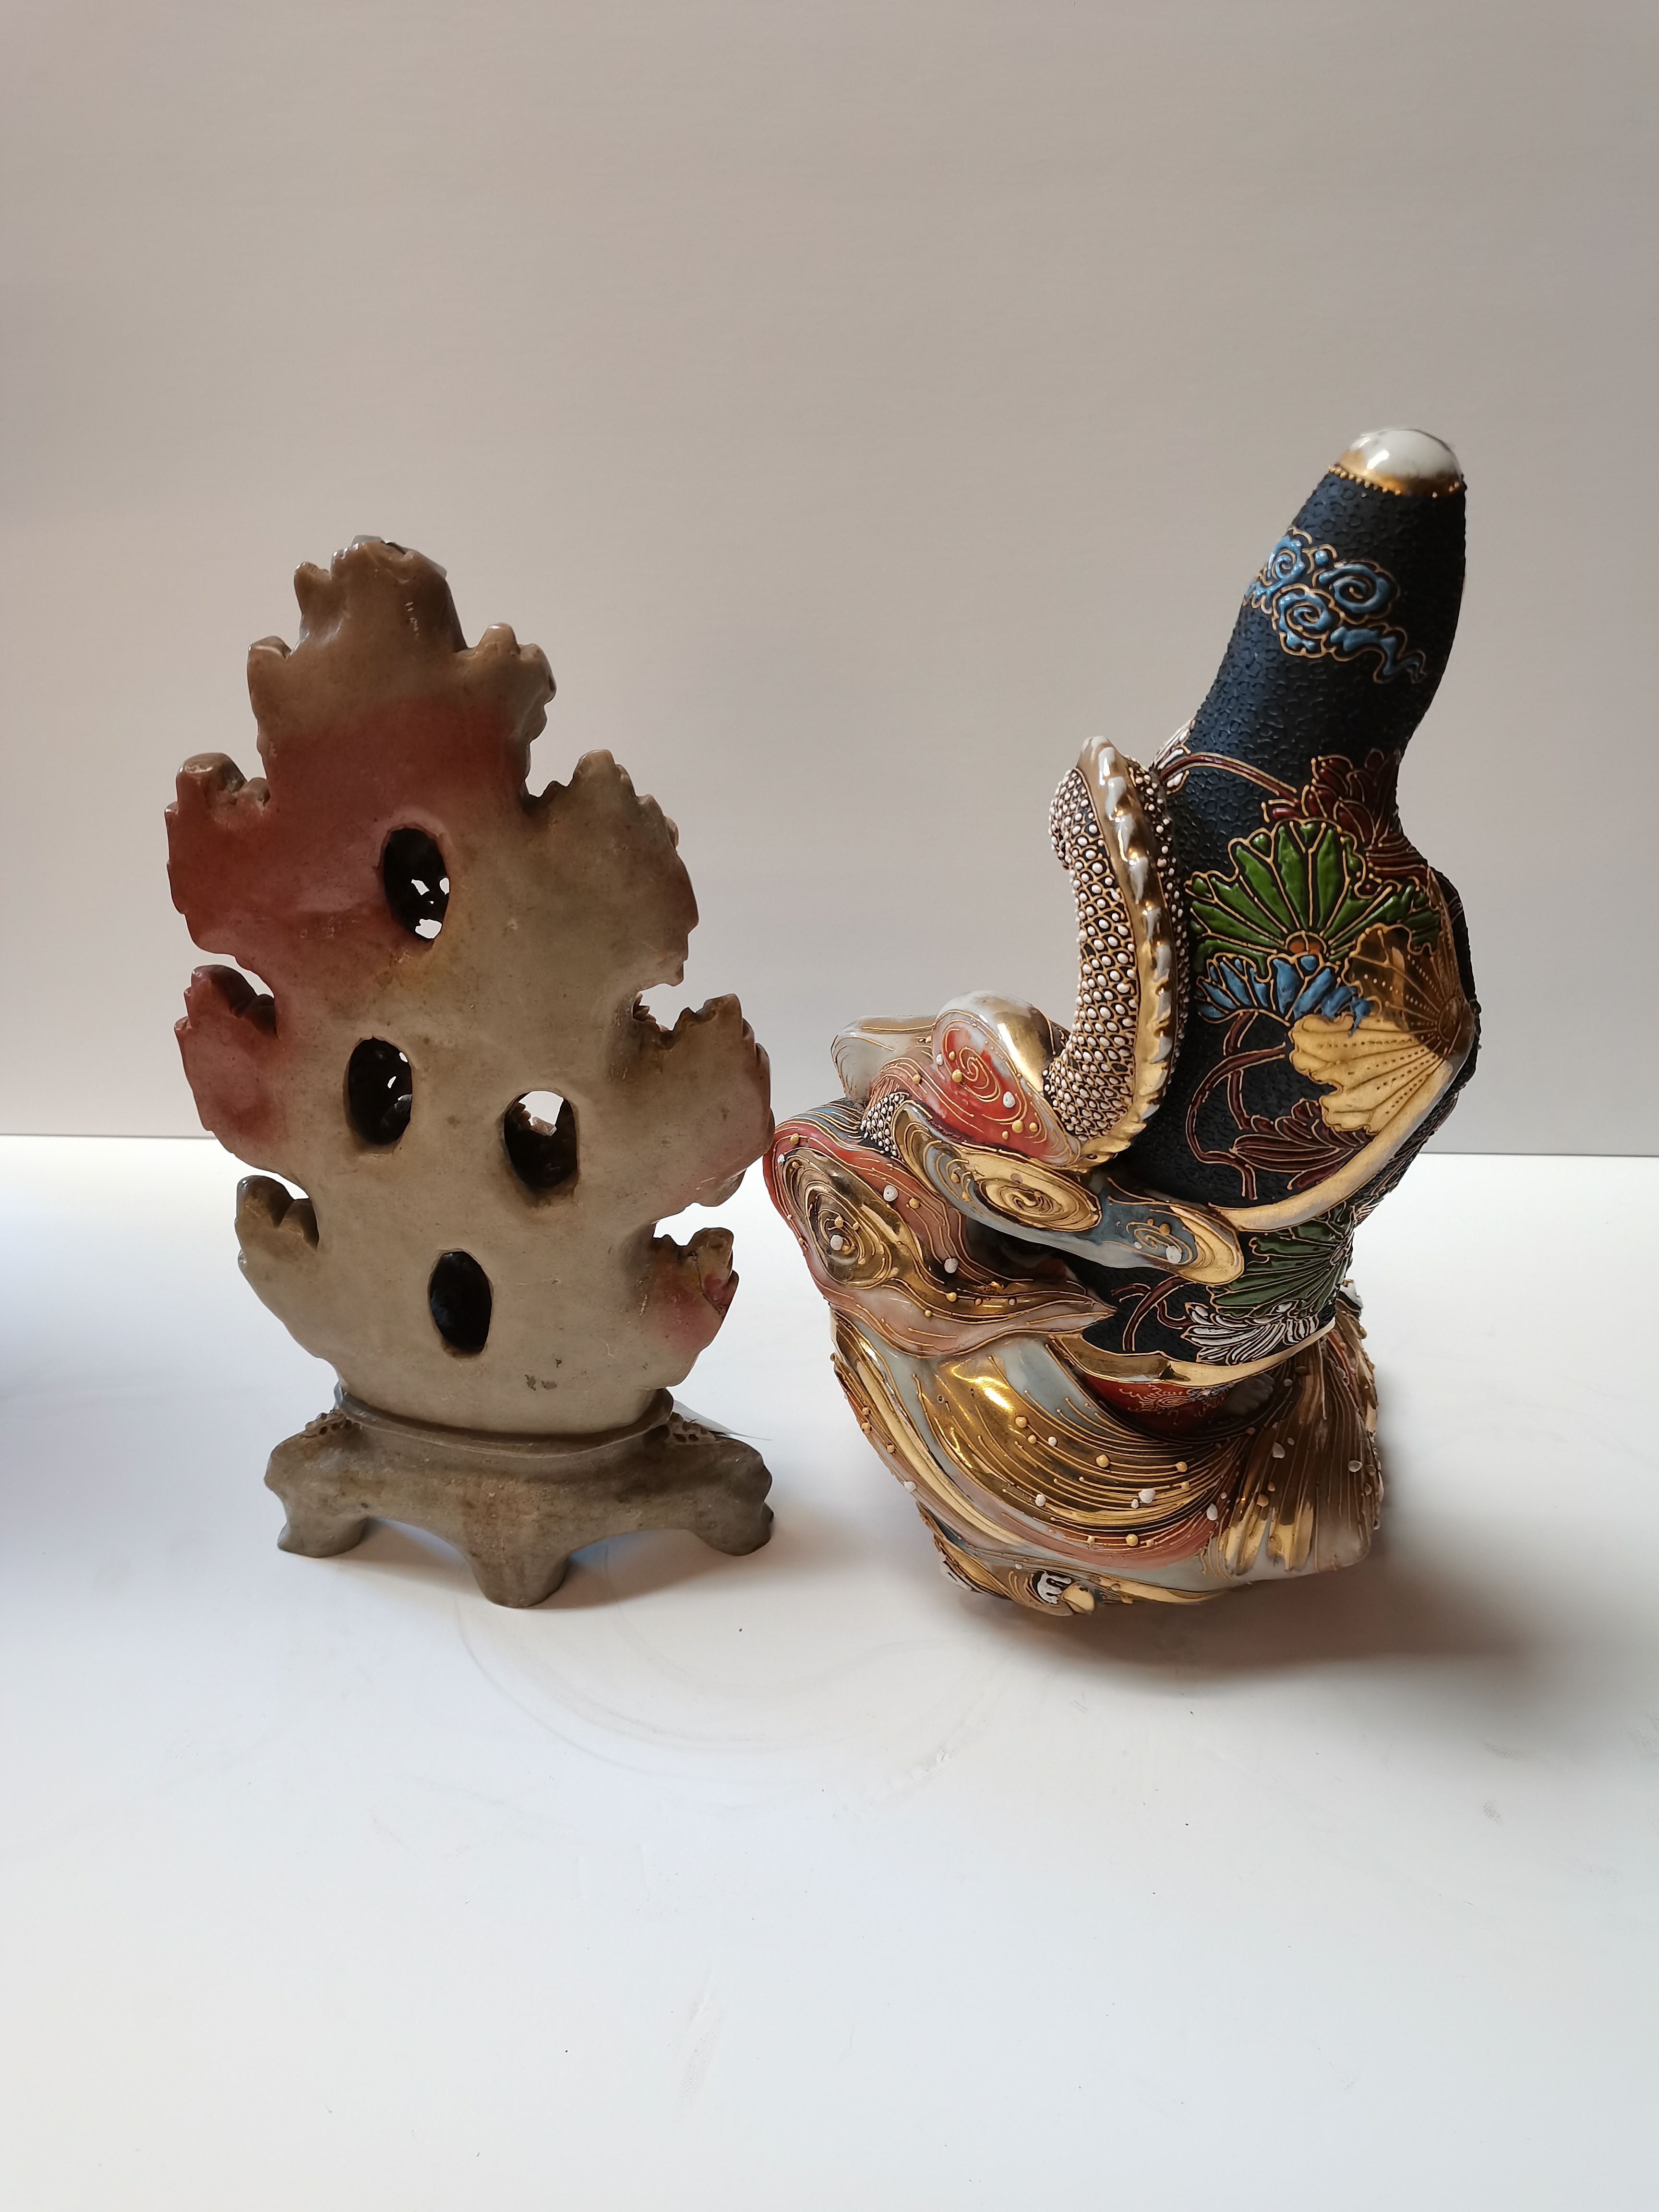 30cm Japanese vases, figure and soapstone ornament - Image 5 of 5